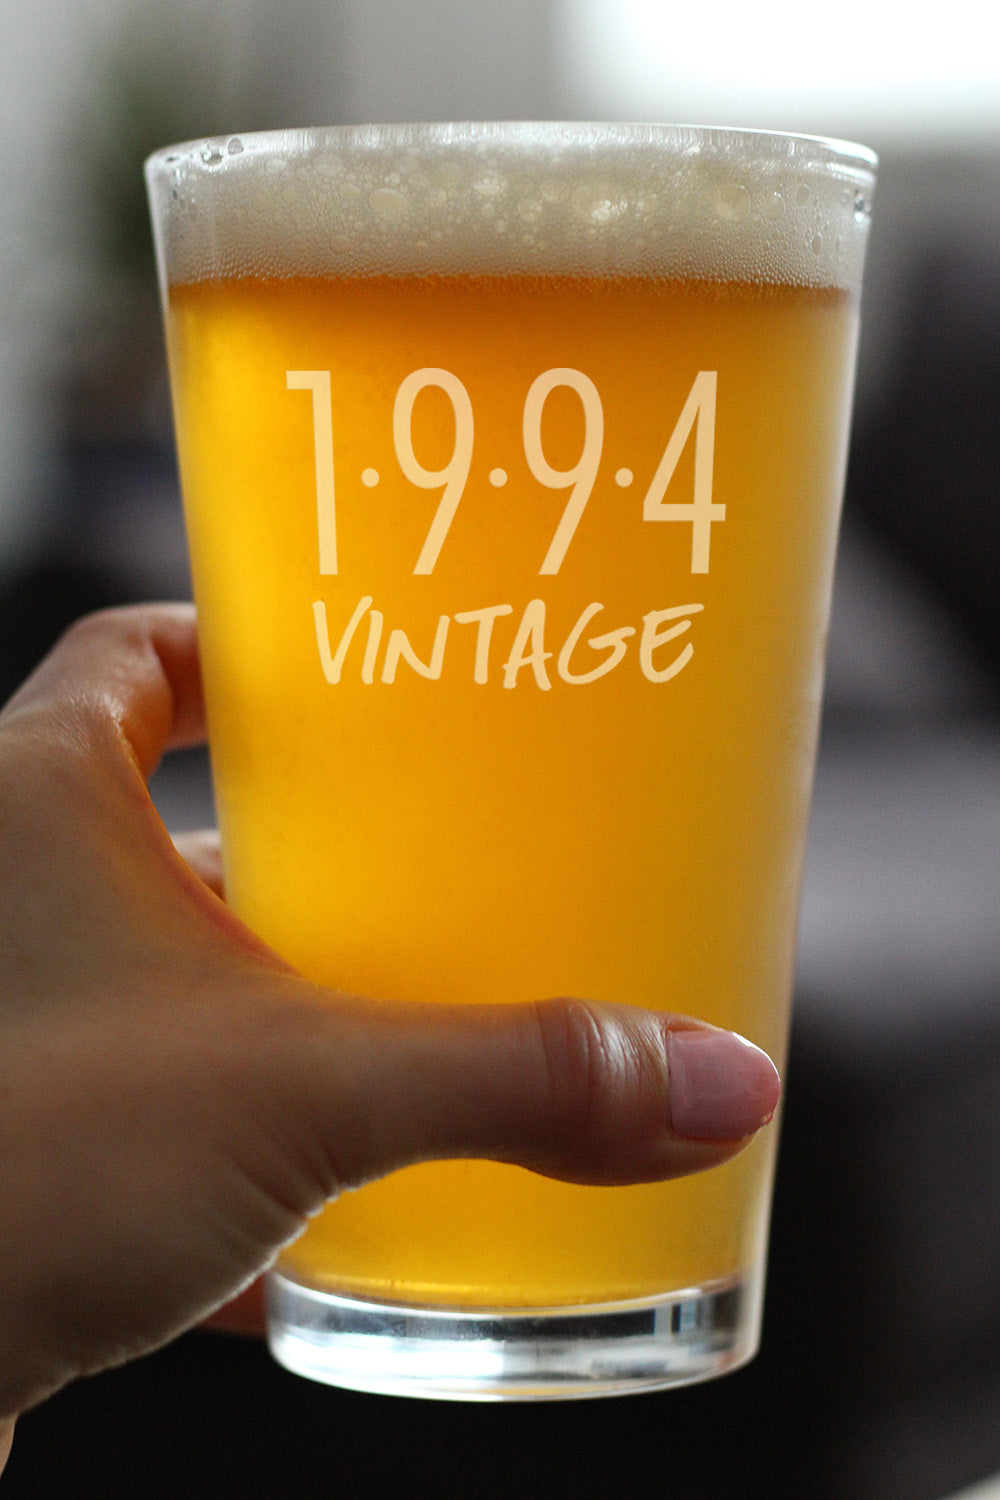 Vintage 1994 - Pint Glass for Beer - 30th Birthday Gifts for Men or Women Turning 30 - Fun Bday Party Decor - 16 oz